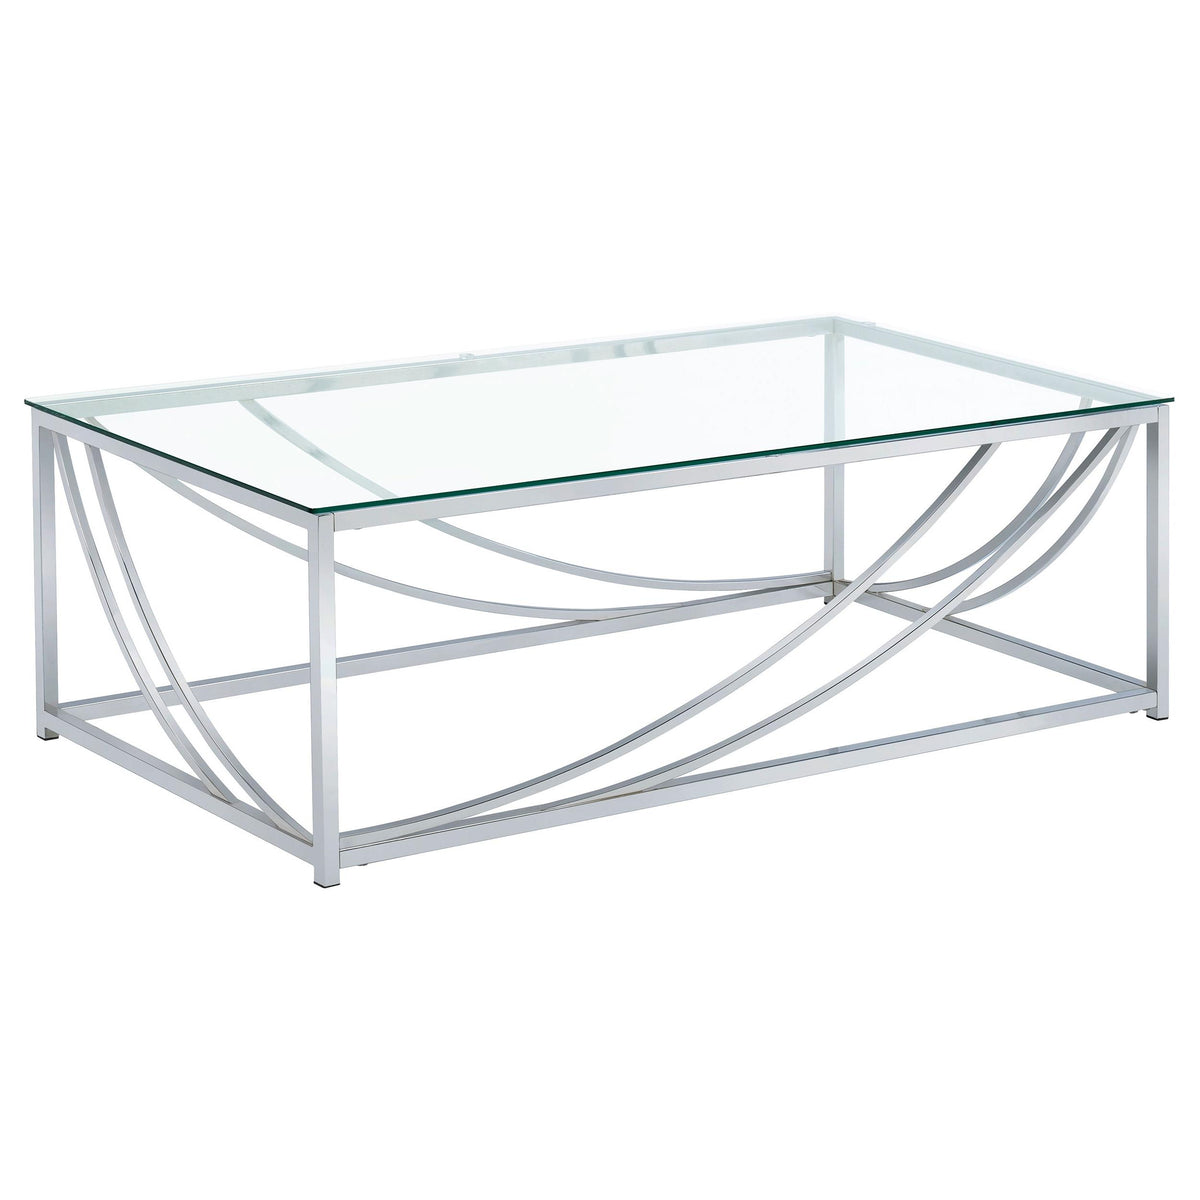 Lille Glass Top Rectangular Coffee Table Accents Chrome Lille Glass Top Rectangular Coffee Table Accents Chrome Half Price Furniture